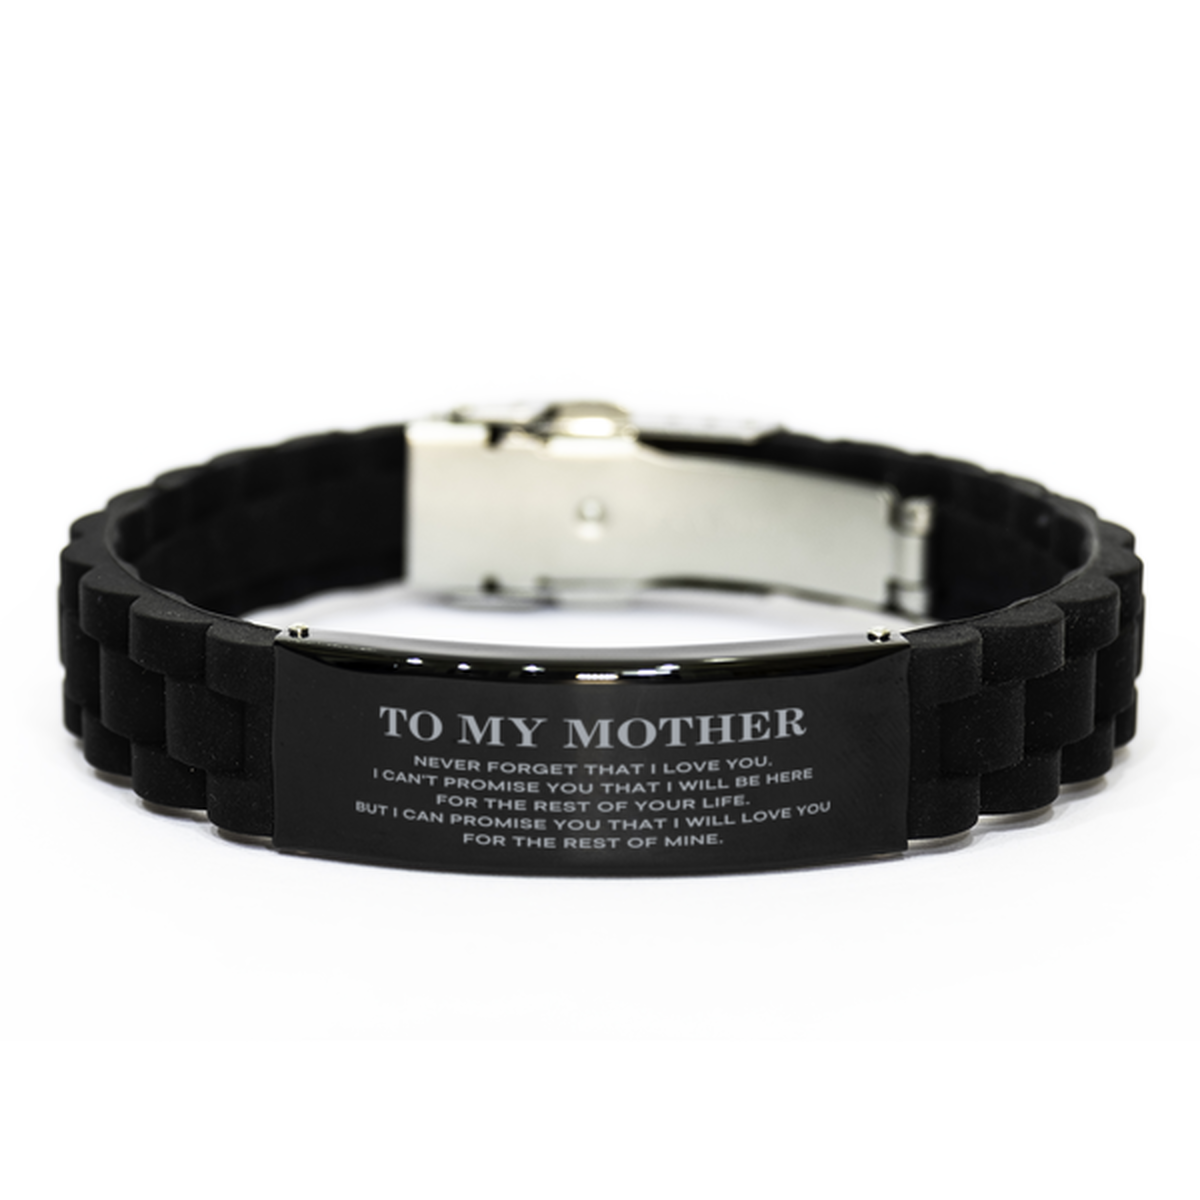 To My Mother Gifts, I will love you for the rest of mine, Love Mother Bracelet, Birthday Christmas Unique Black Glidelock Clasp Bracelet For Mother